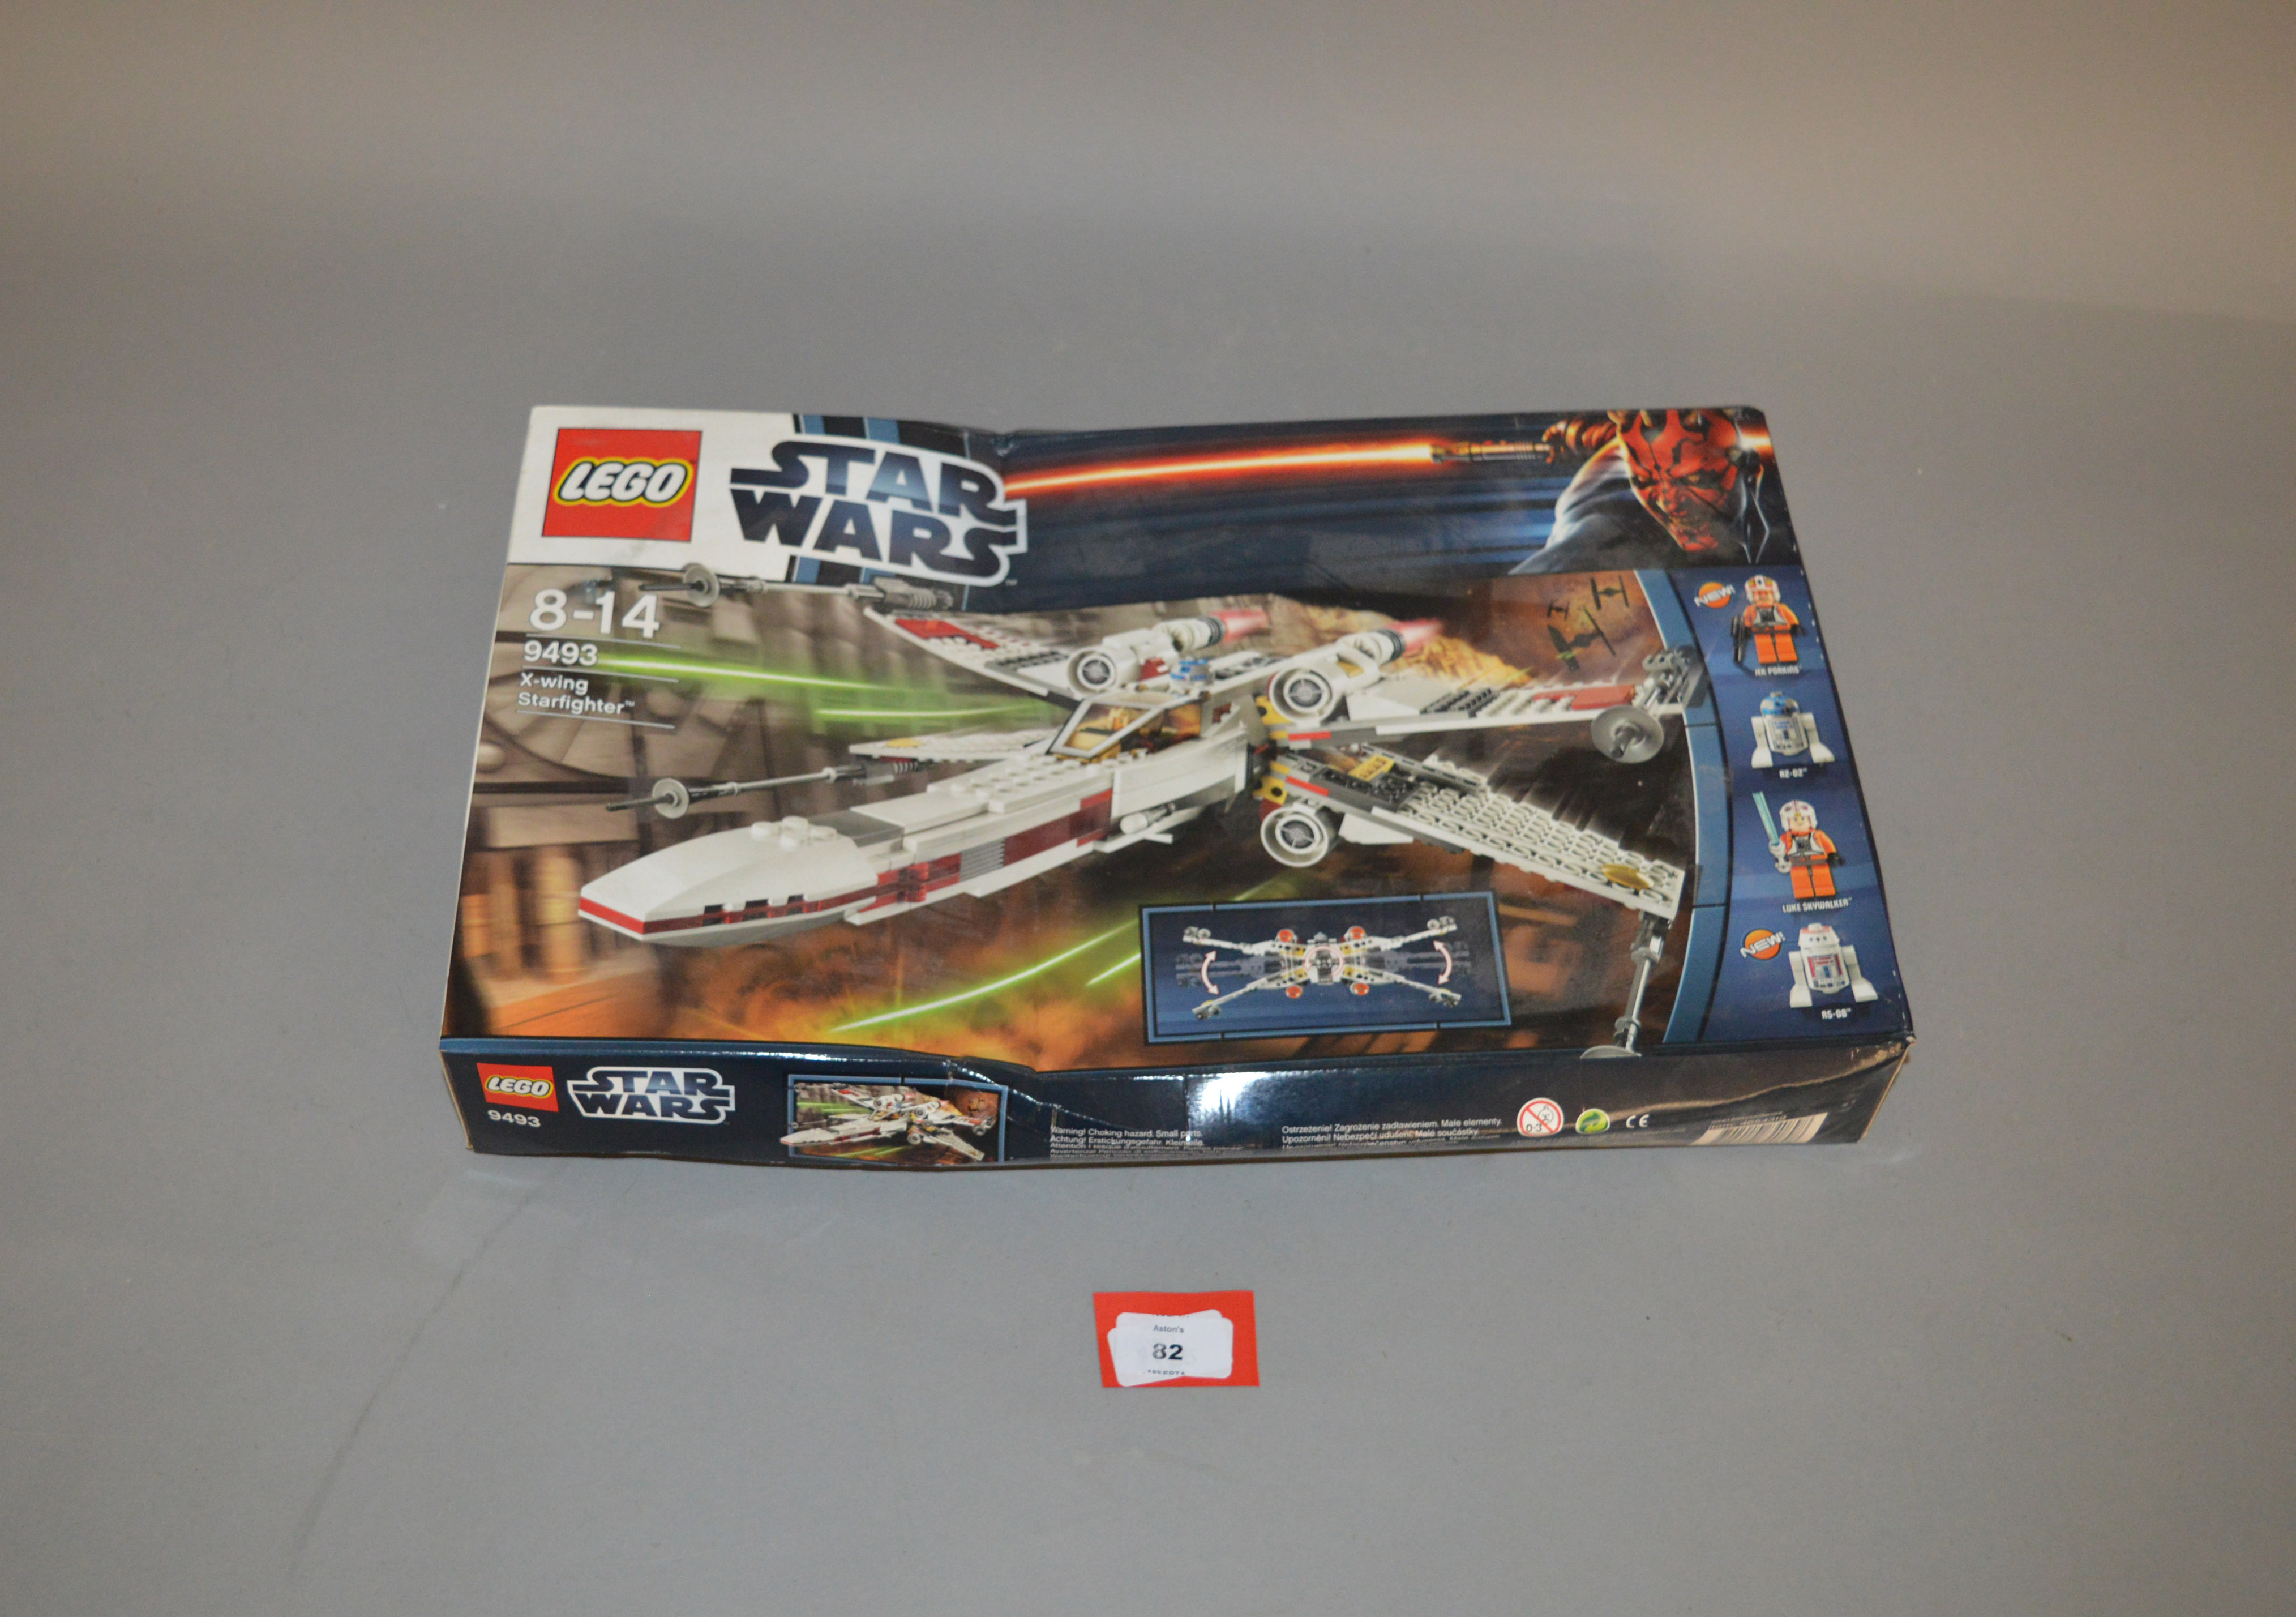 Lego Star Wars 9493 'X-wing Starfighter', sealed in generally F/G box with crushing and creasing.